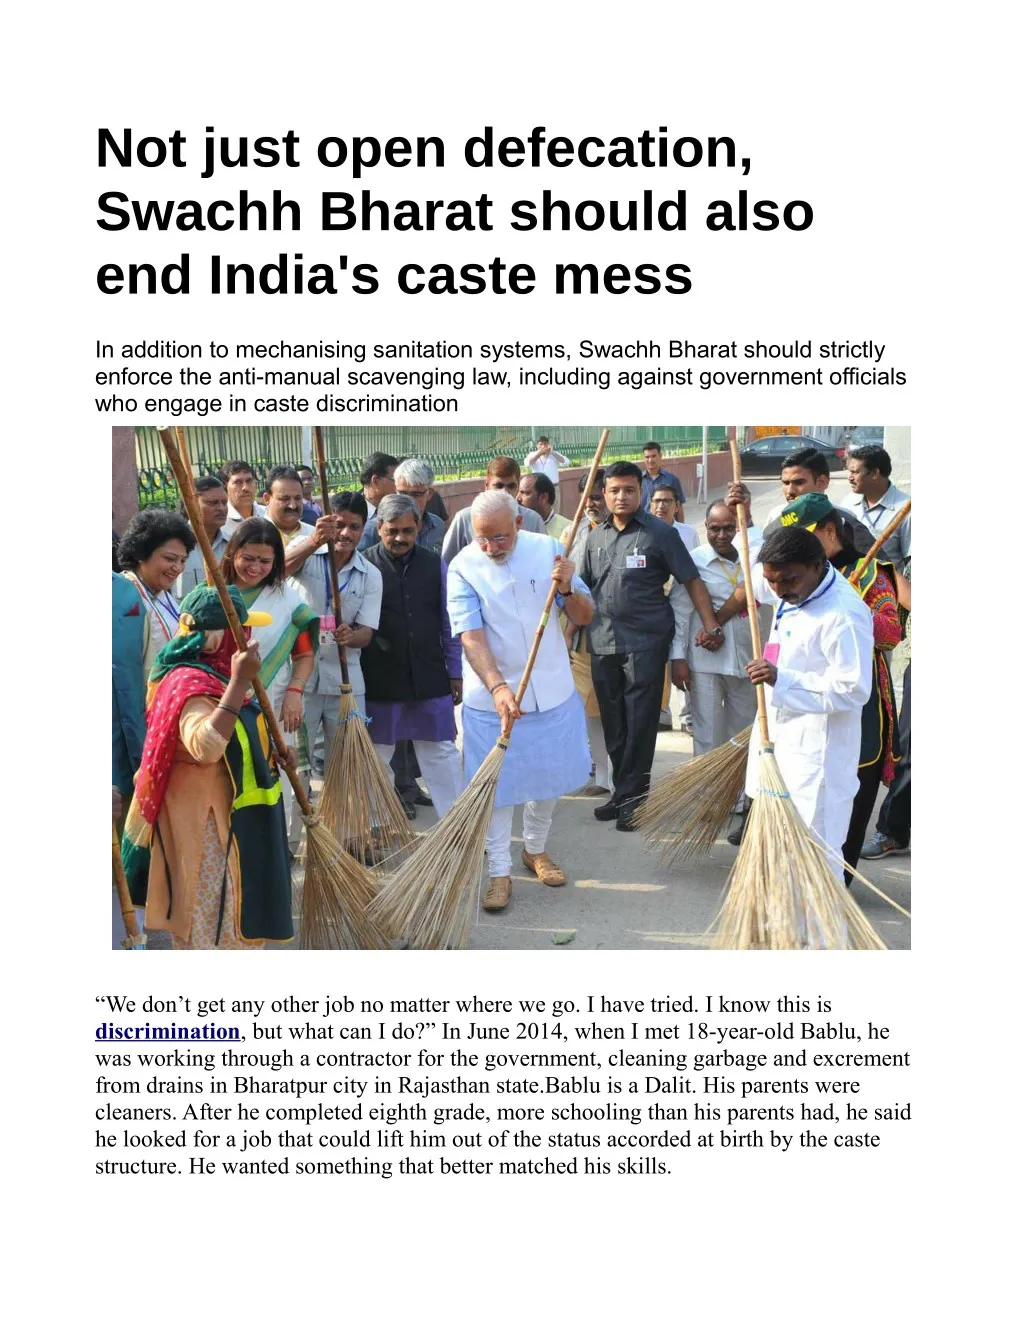 not just open defecation swachh bharat should